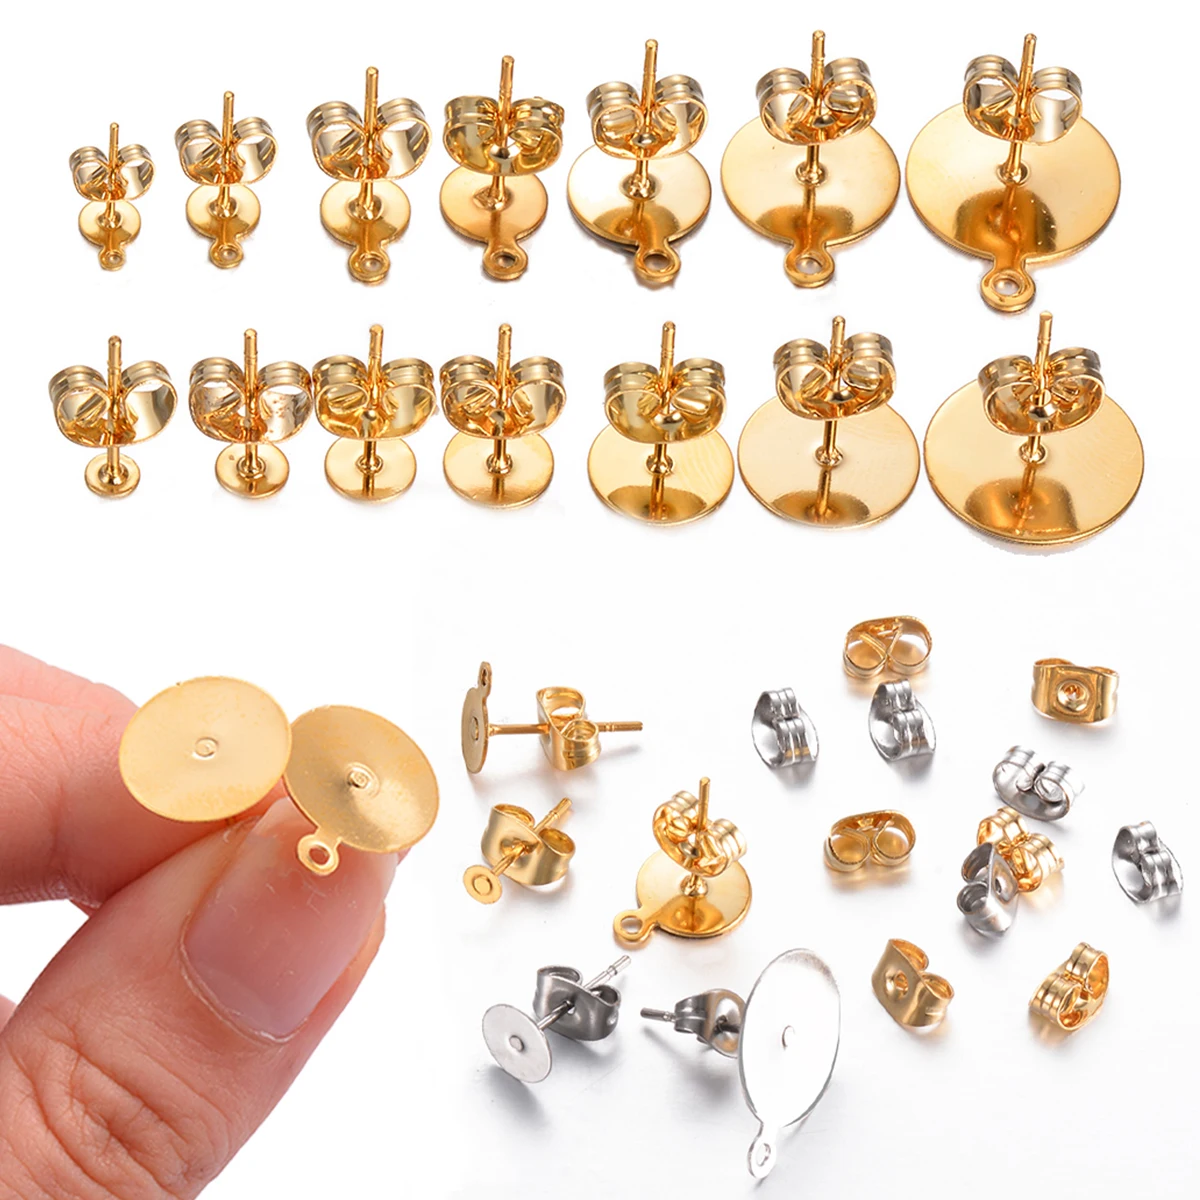 

50-100pcs/lot Stainless Steel Earring Studs Blank Post Base Pins with Earring Plug Findings Ear Back for DIY Jewelry Making